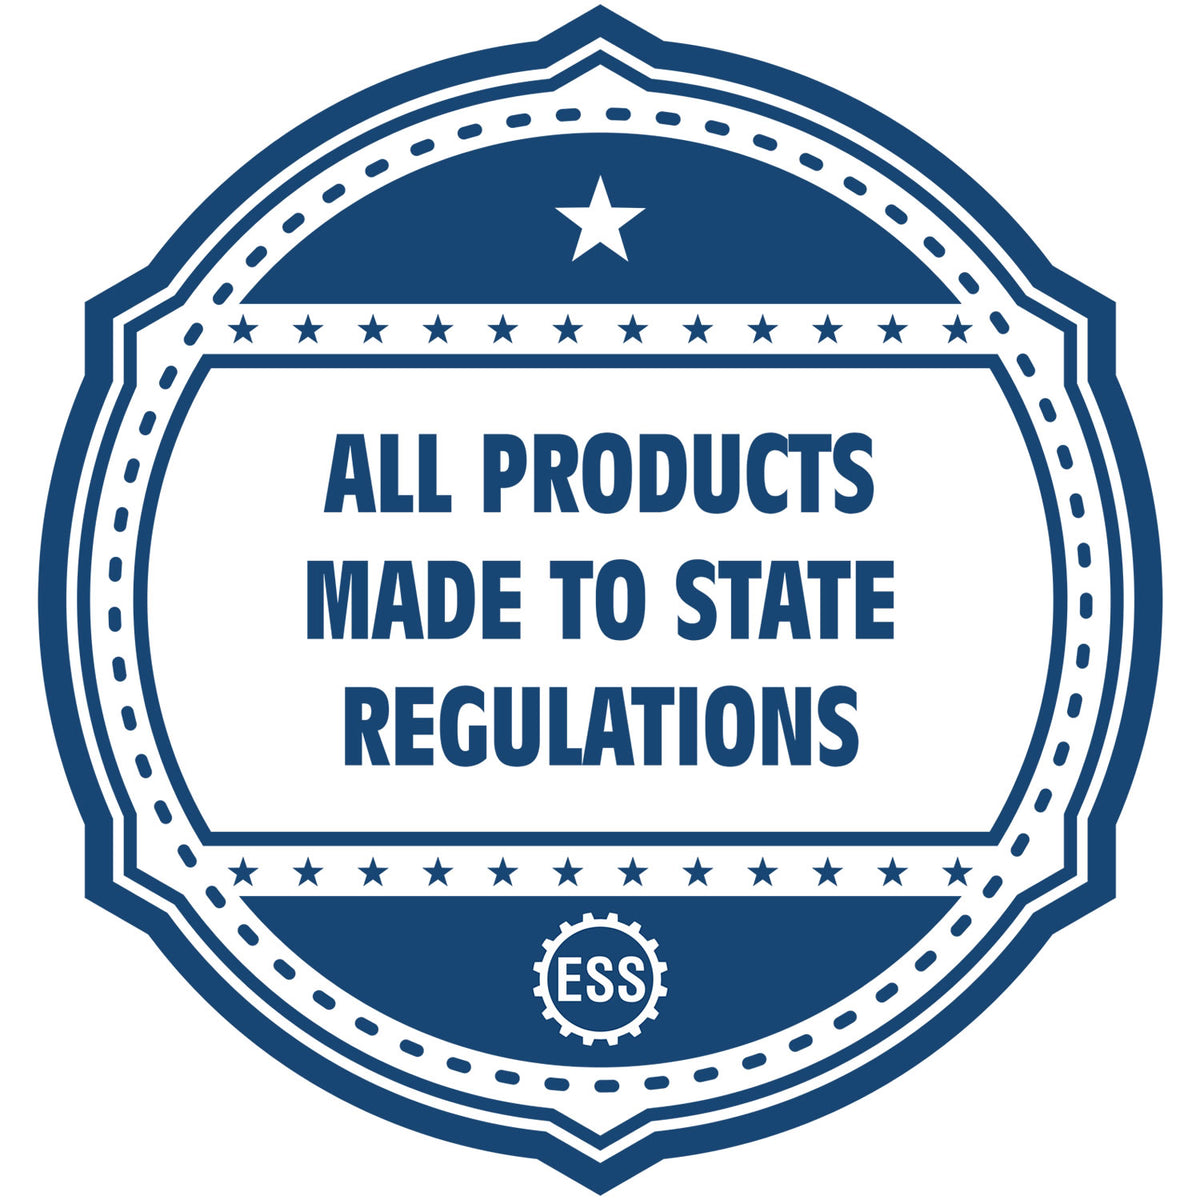 A blue icon or badge for the Gift Virginia Architect Seal showing that this product is made in compliance with state regulations.